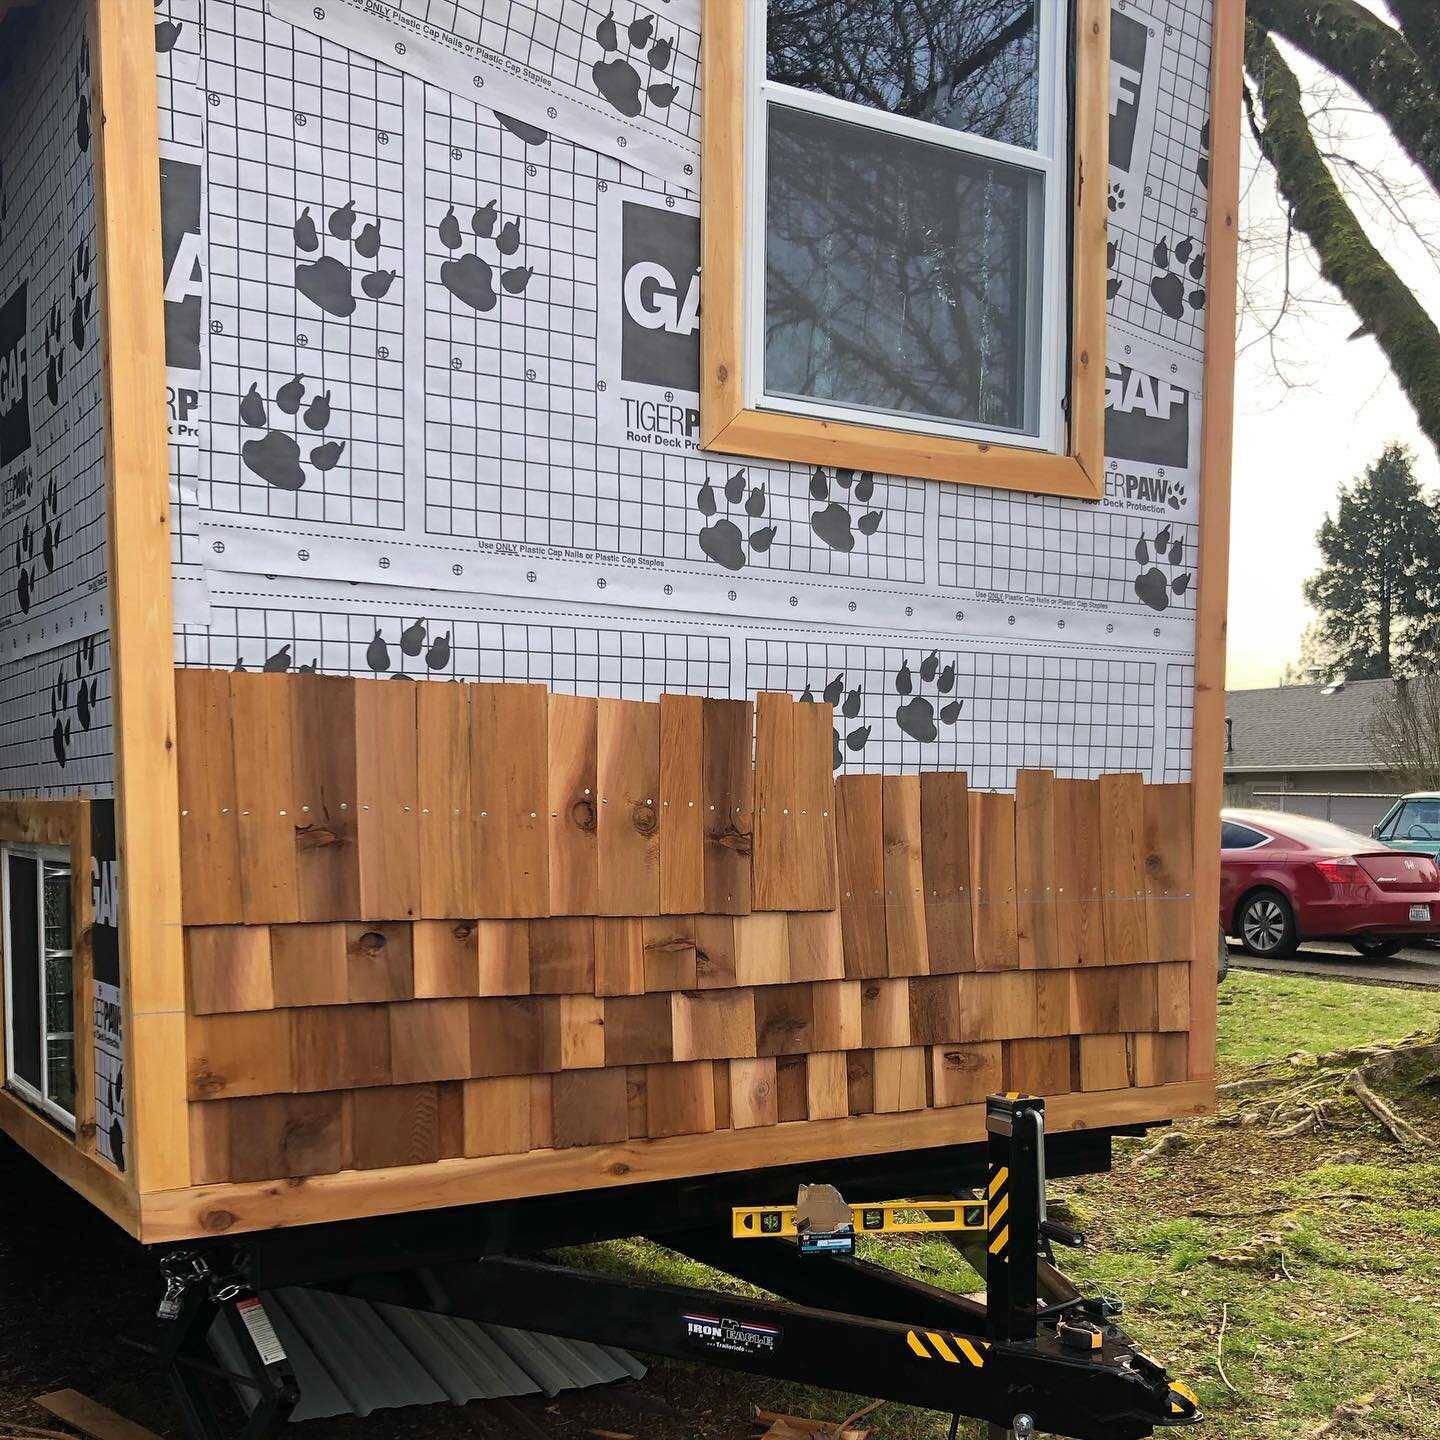 We&rsquo;re going to need more shingles. 

#tinyhouse #tinyhome #diy #cedar